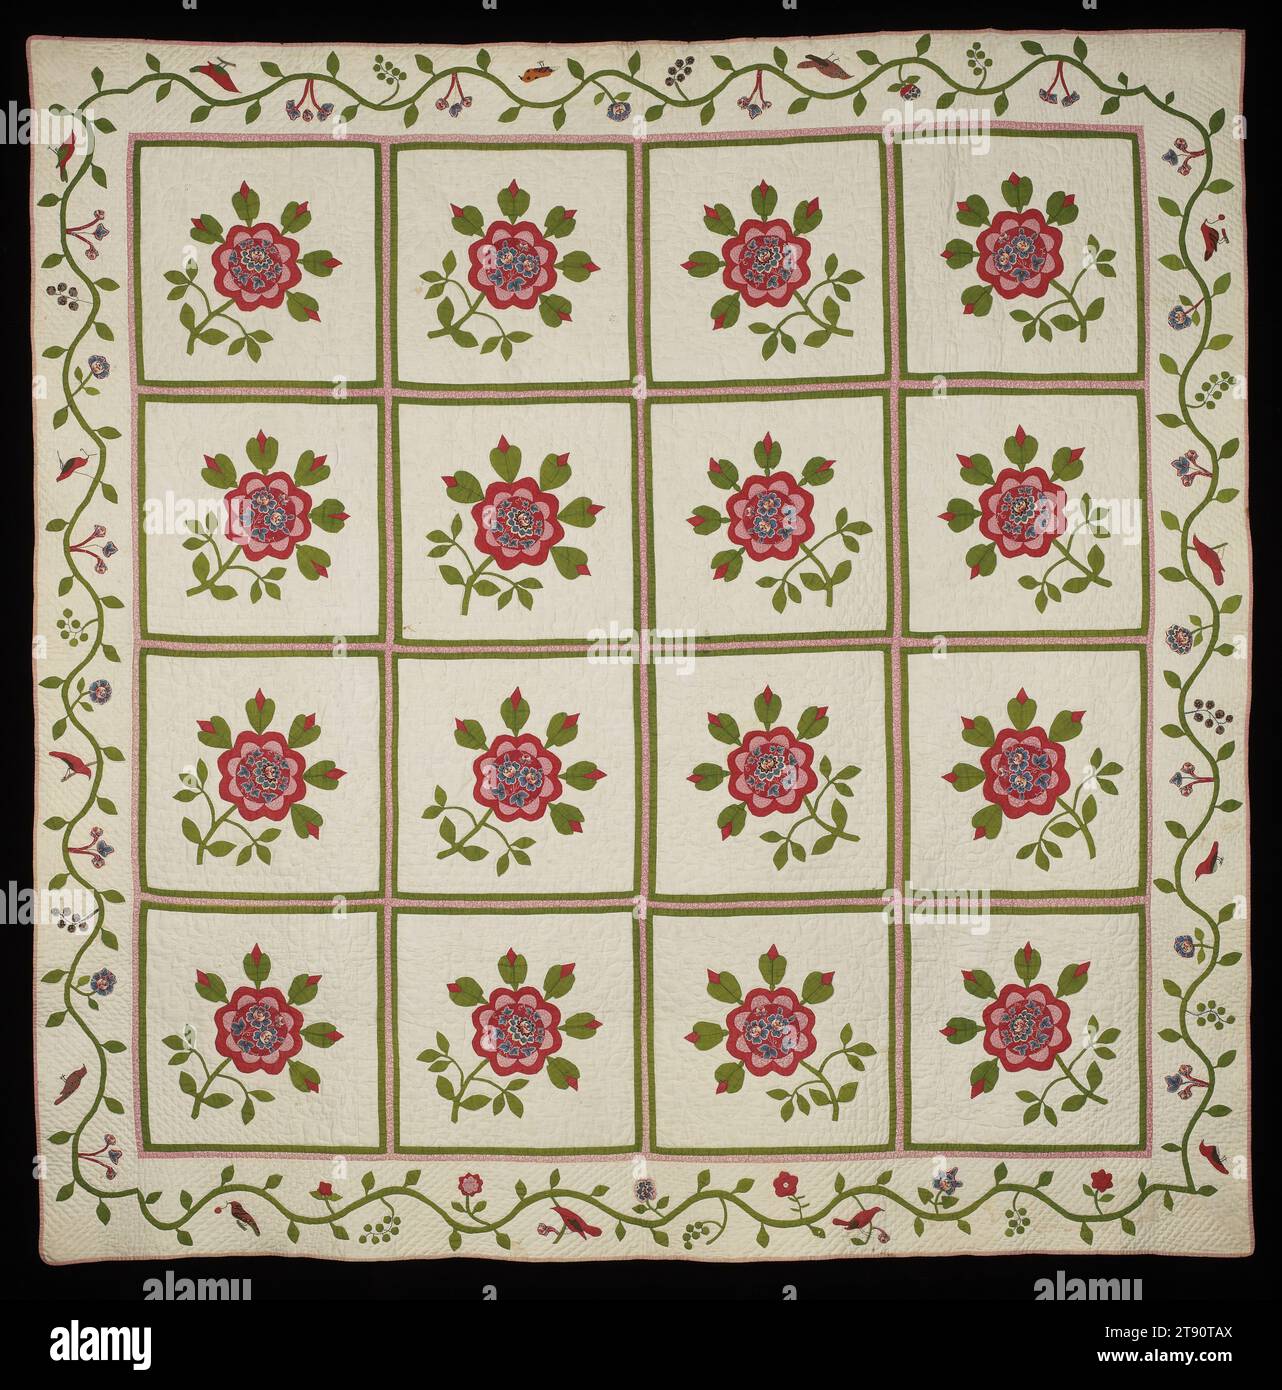 Rose of Sharon quilt, c. 1850, L.78-7/8 x W.78-7/8 in., Cotton; hand appliquéd and pieced; quilted, United States, 19th century, Quilts such as this Rose of Sharon pattern with a fruit and bird border were often made to celebrate special occasions such as a wedding and were given as a gift or were part of a dowry. In general, they did not serve as an everyday bed cover but were displayed on holidays and for other celebrations Stock Photo